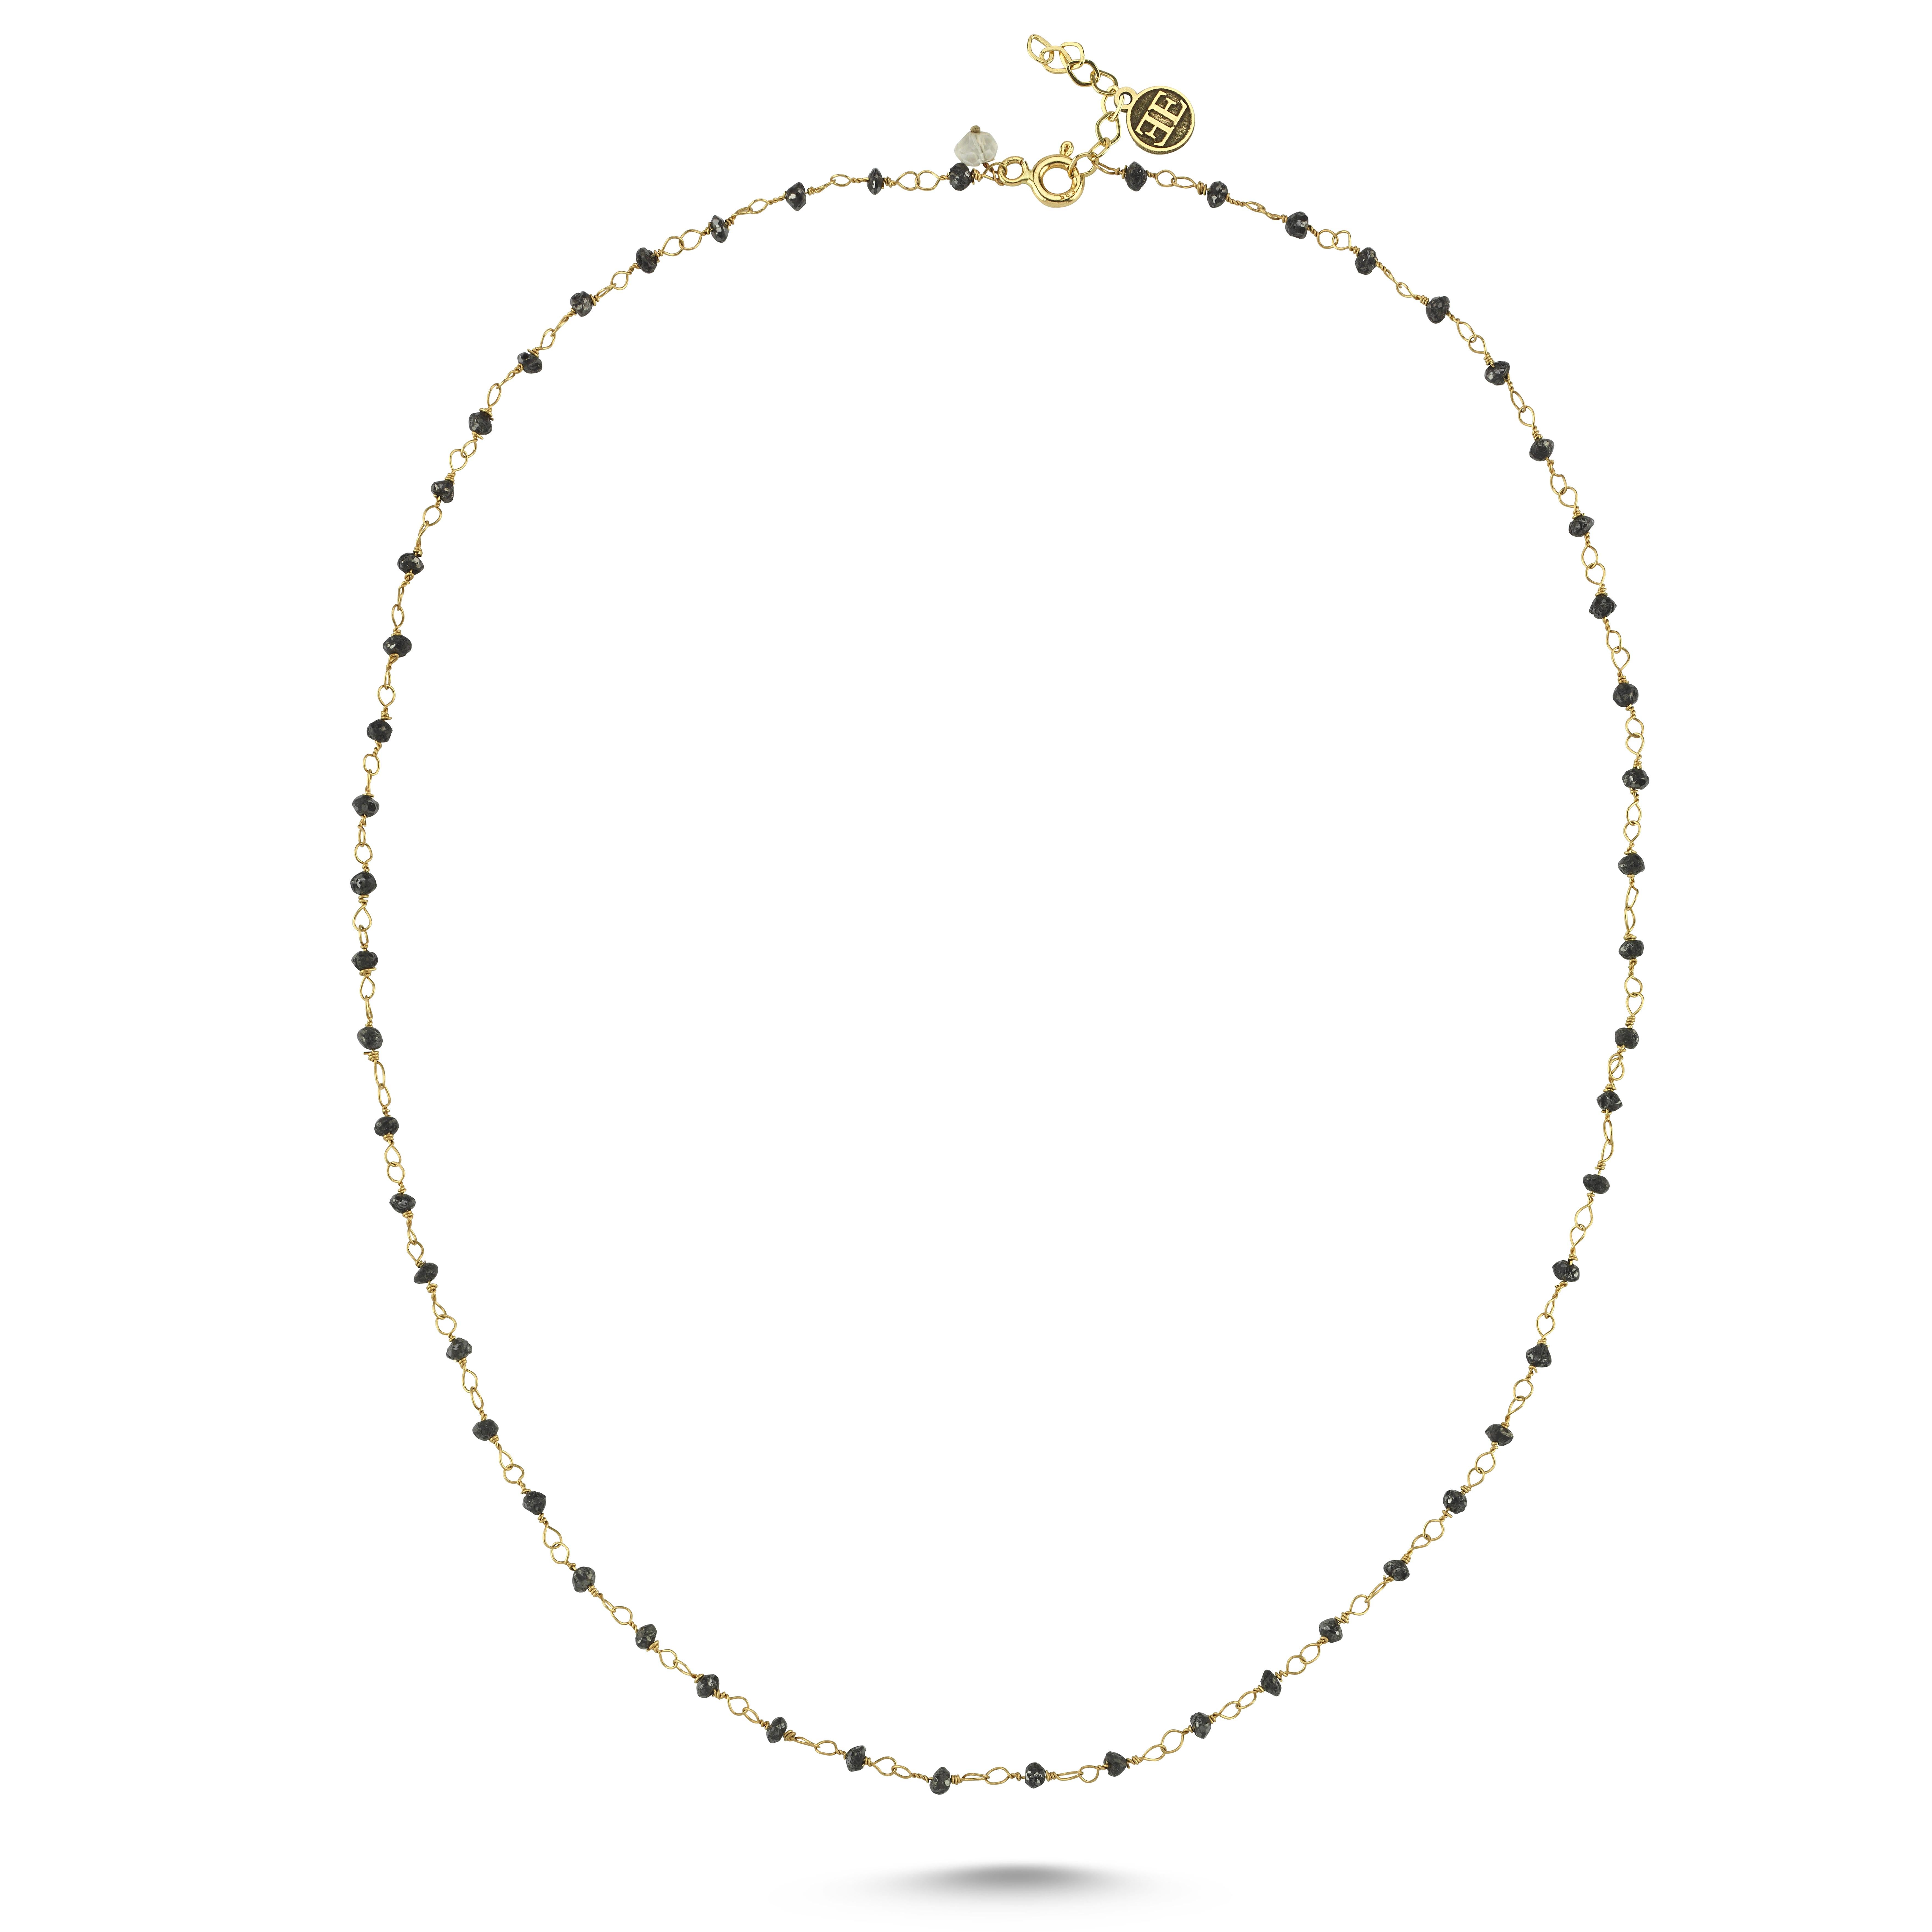 This necklace is handmade with 14K gold and bead cut diamonds. You can prefer it also with yellow/green diamonds.